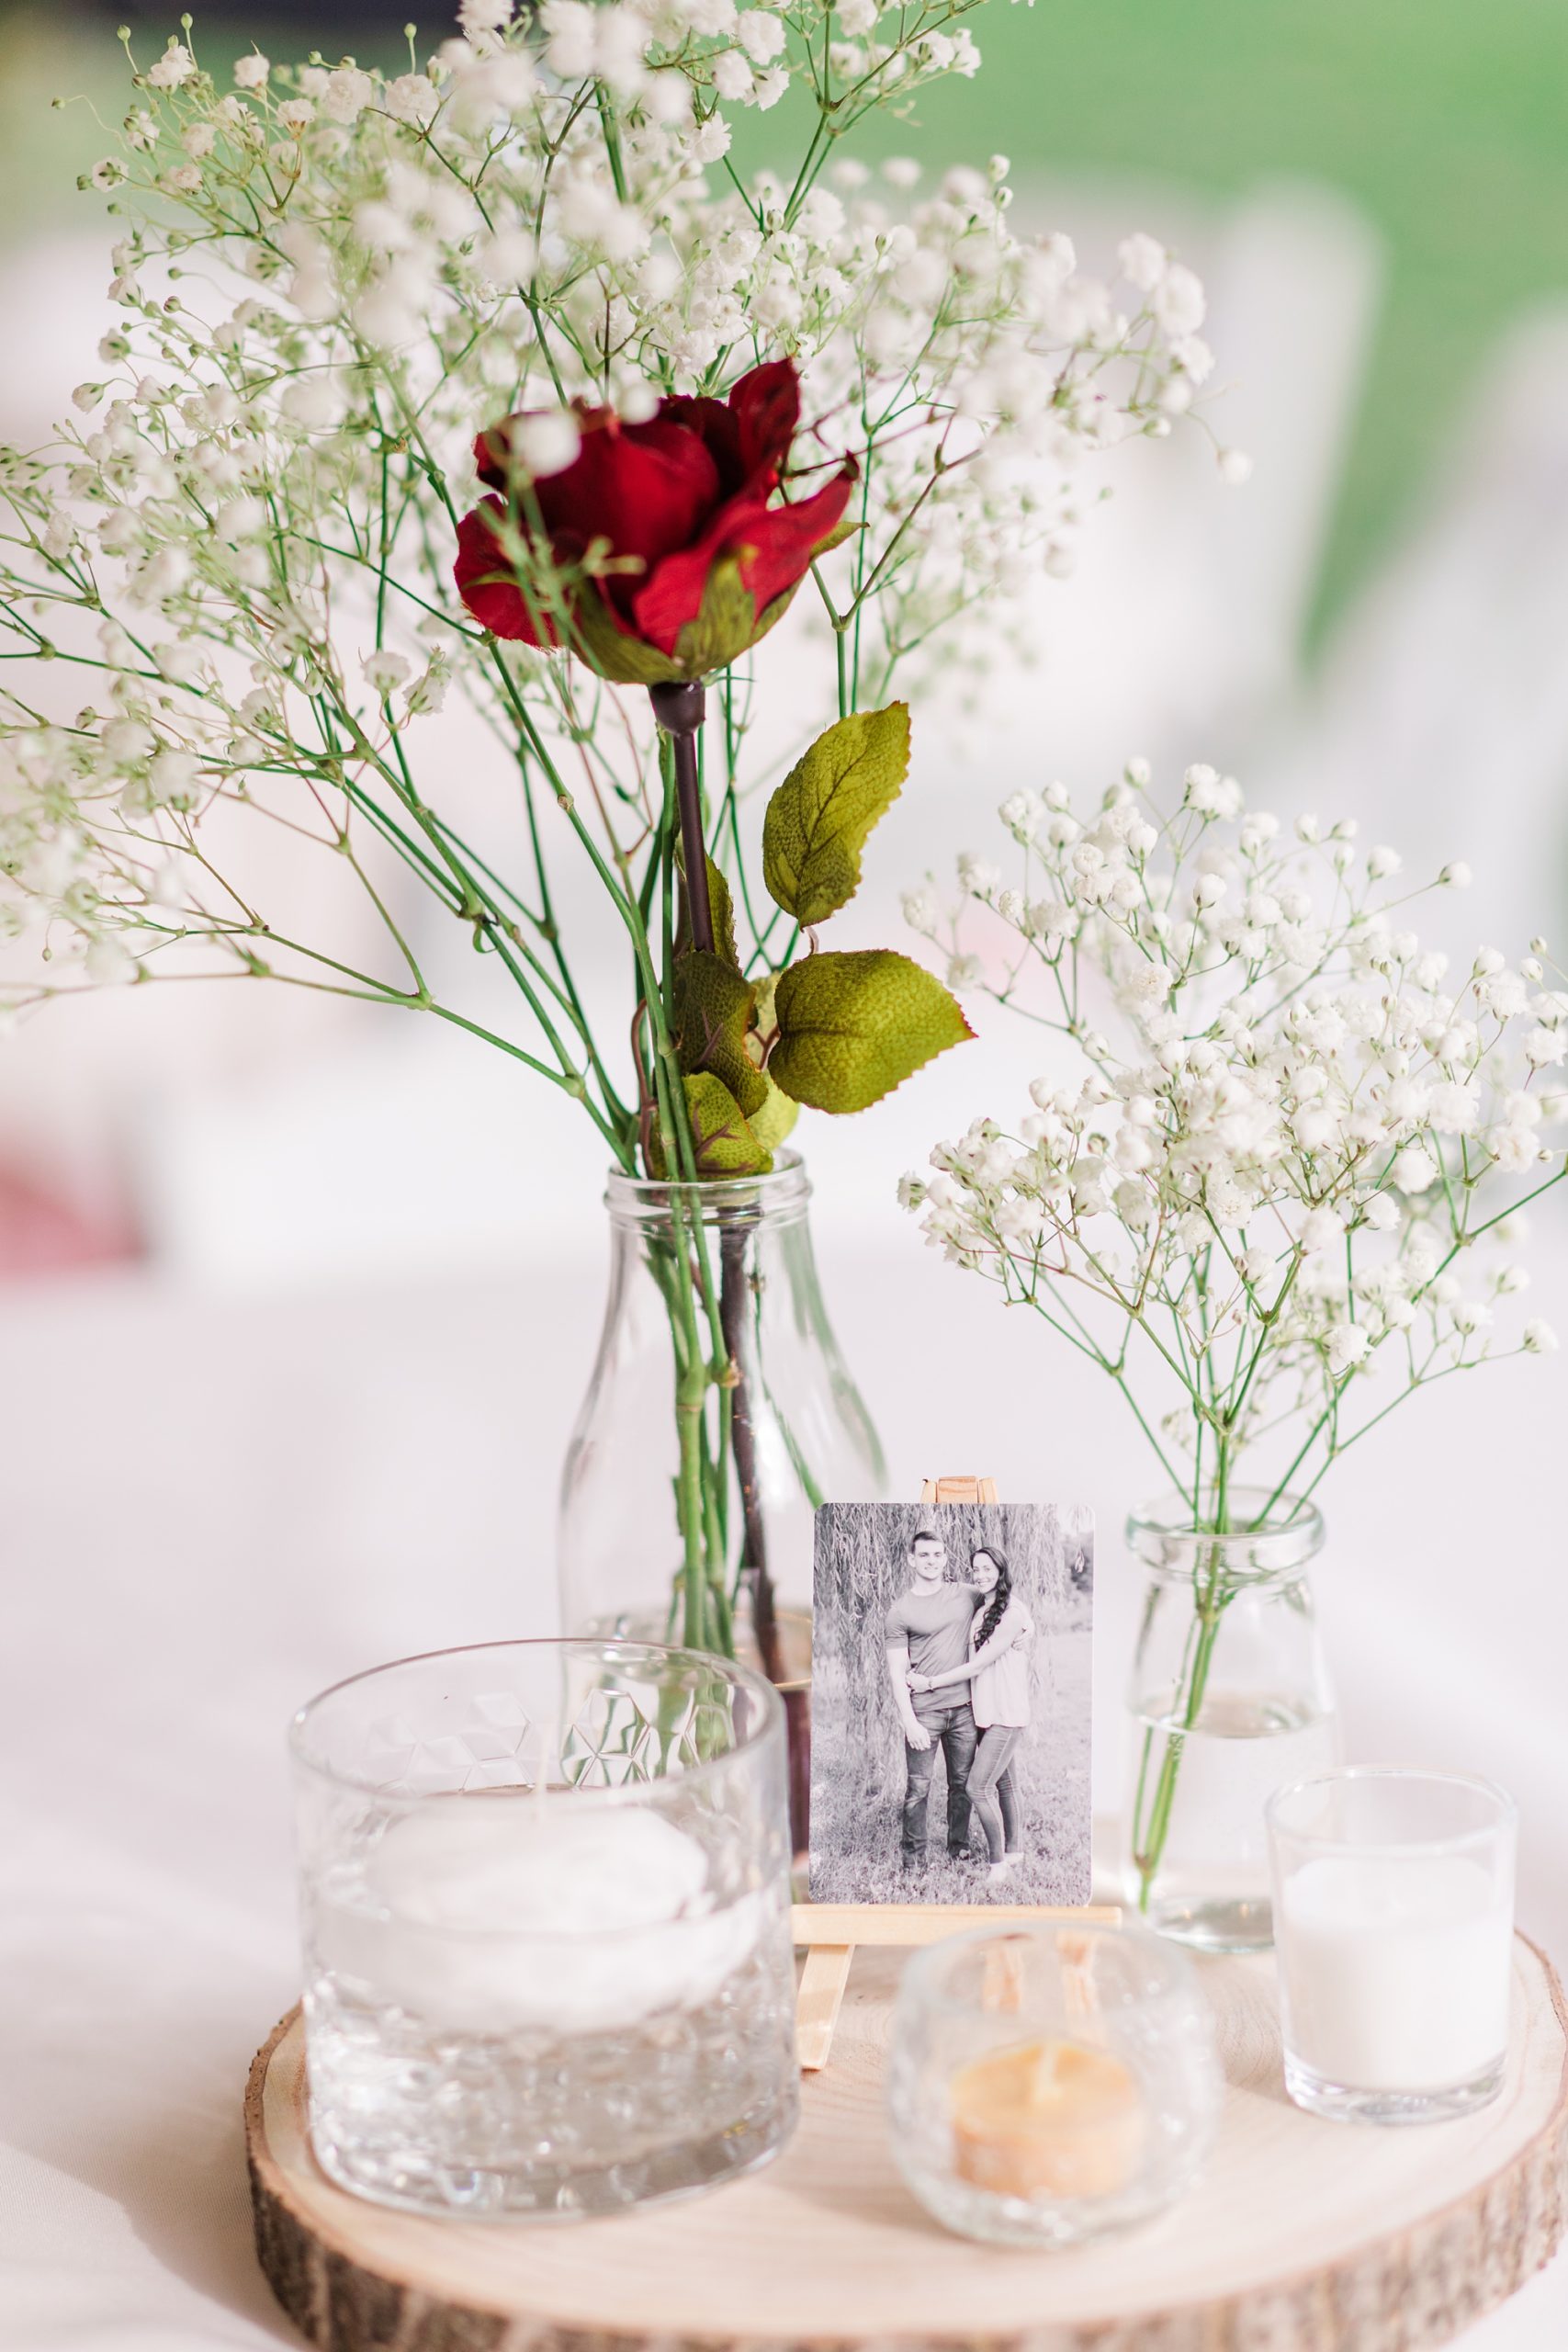 simple centerpieces with red rose and baby's breath